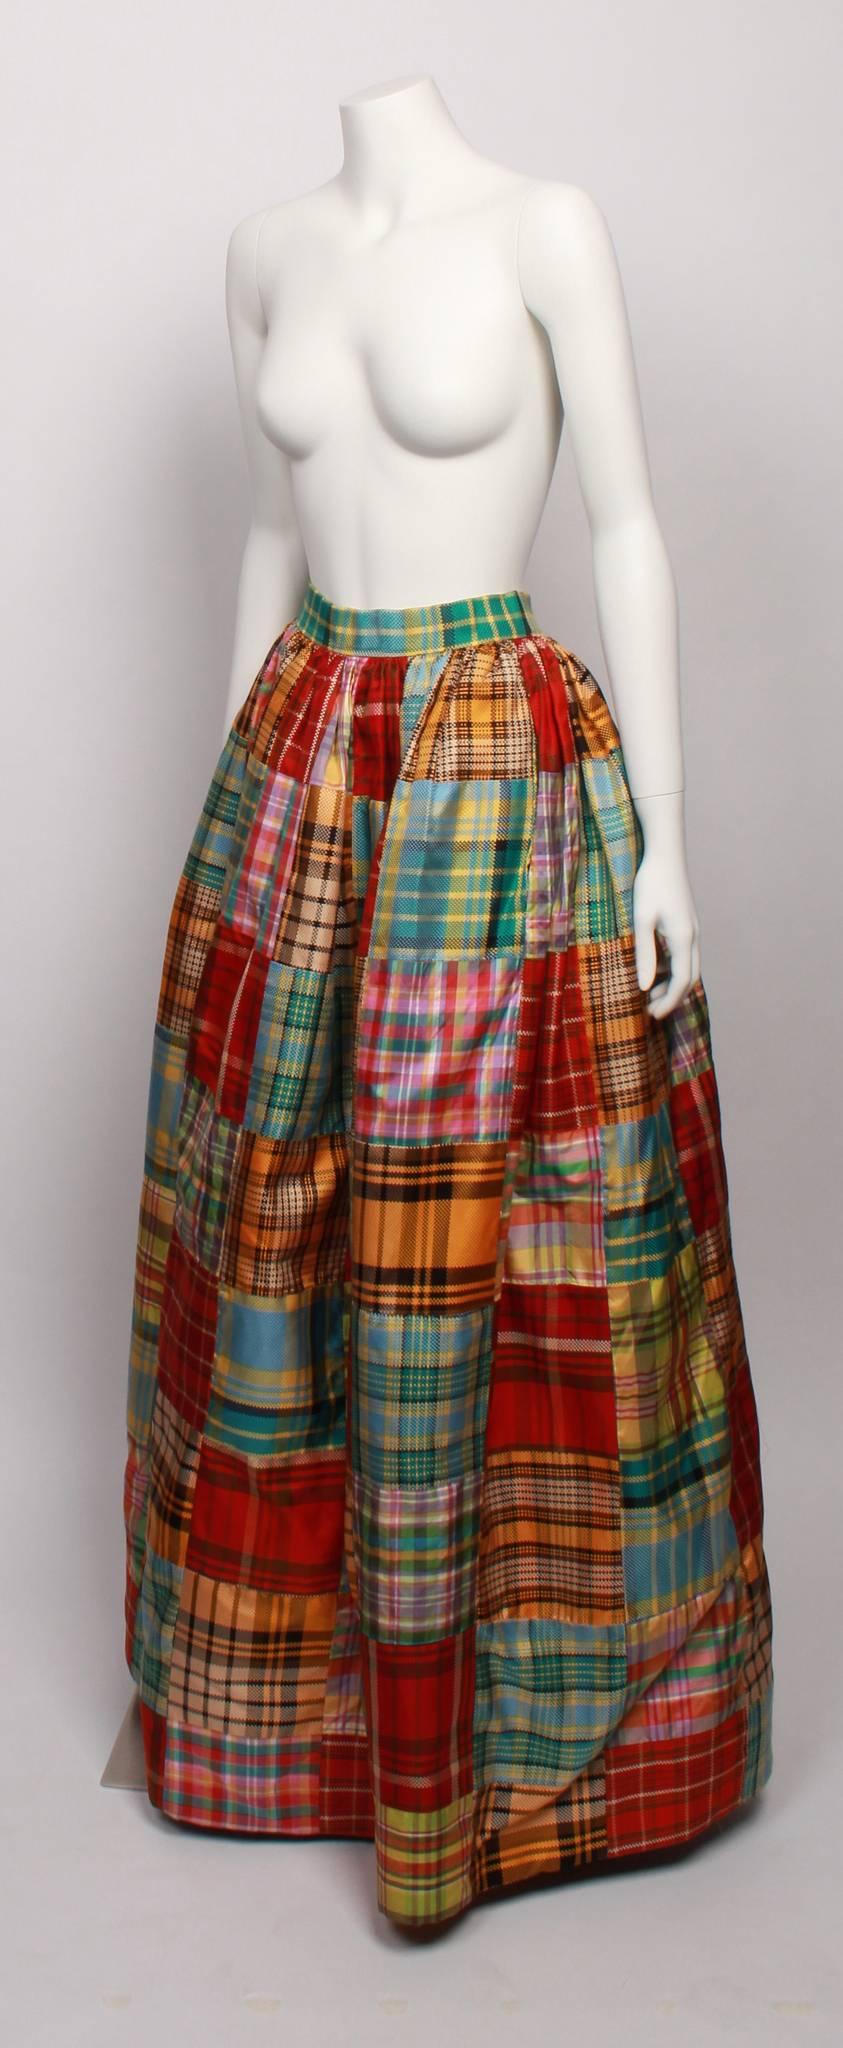 Rare and unique OSCAR DE LA RENTA Patchwork Ball Skirt in multi coloured checked patchwork silk squares. 
Features beautifully finished tulle petticoat under skirt with stiffened hemline for added fullness, and hook and eye closure. 
Full length